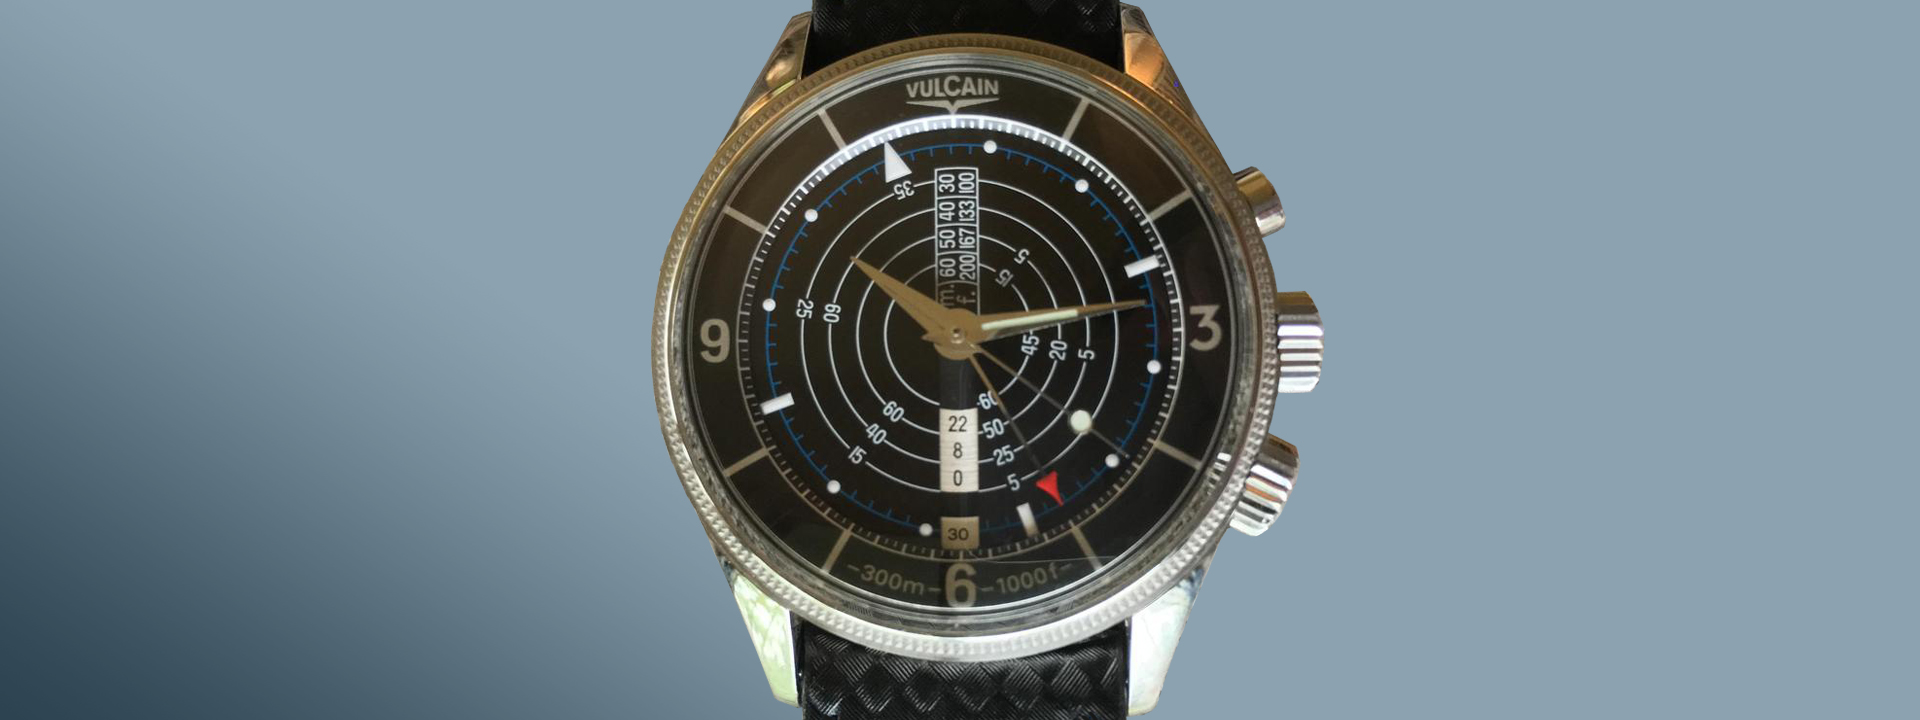 Overlooked and Undervalued Watch Brands - Hamilton, Zenith, Zodiac and Vulcain